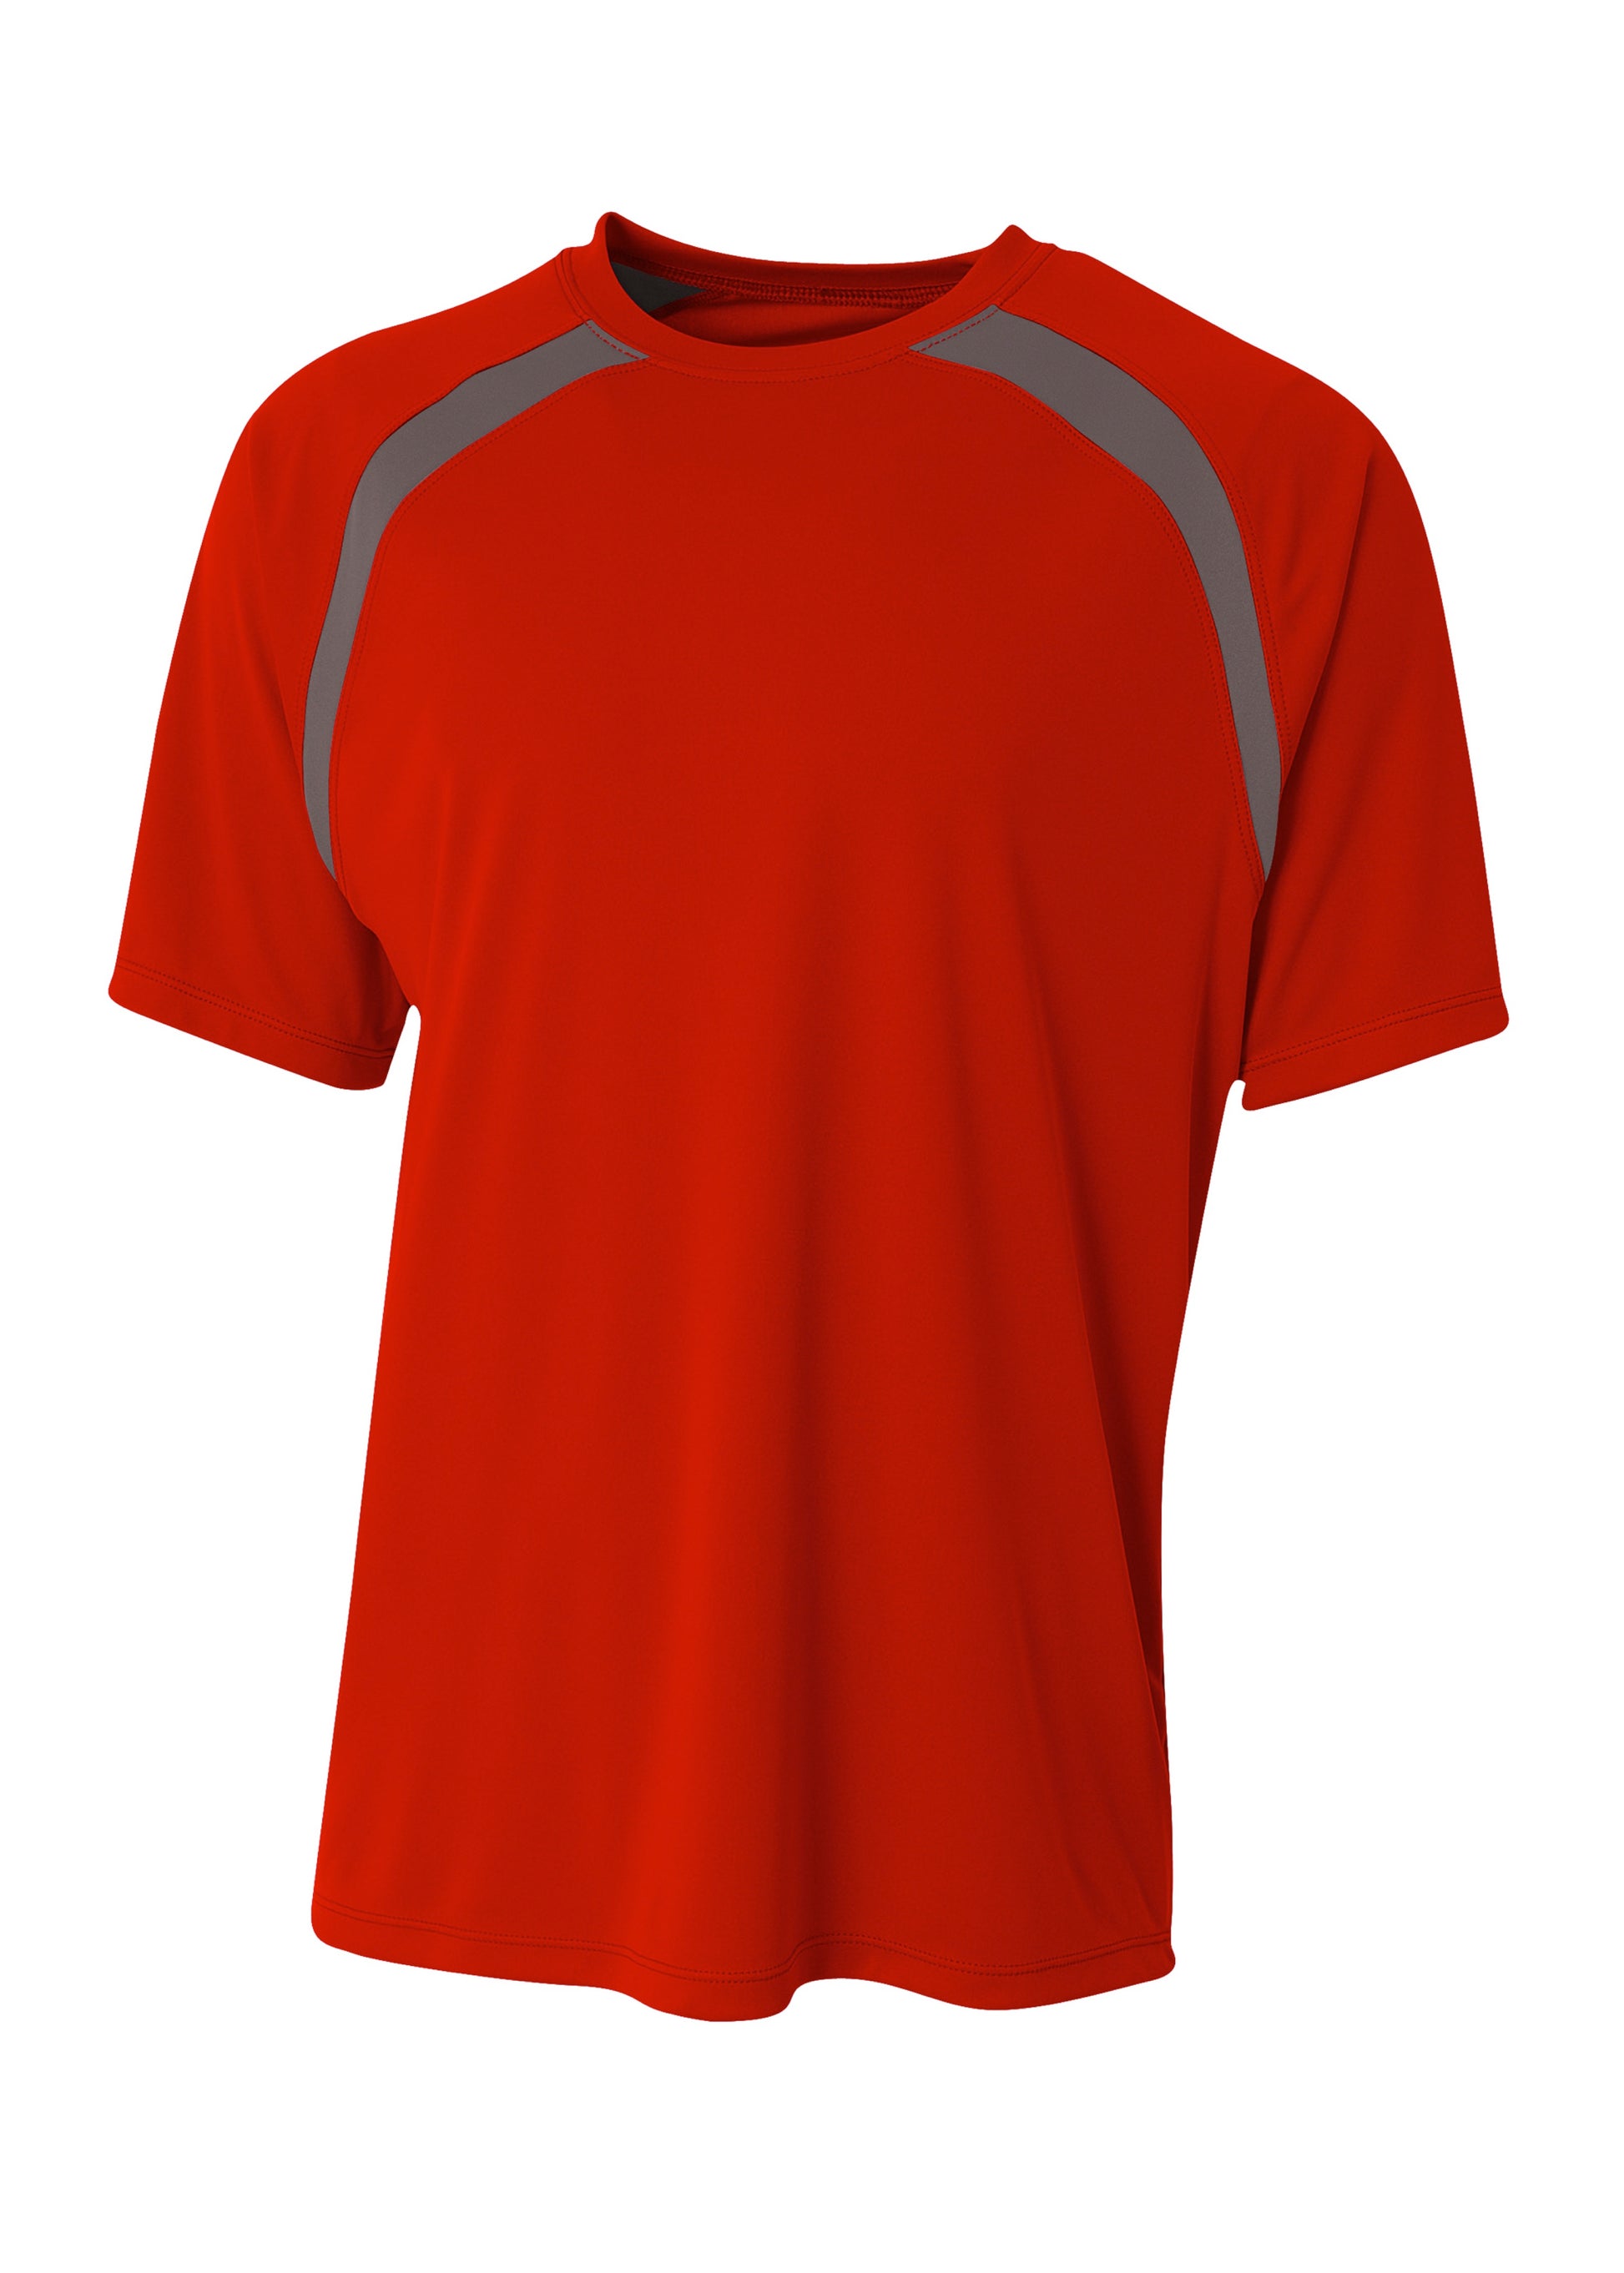 Photo of A4 SHIRTS NB3001  color  SCARLET/GRAPHITE